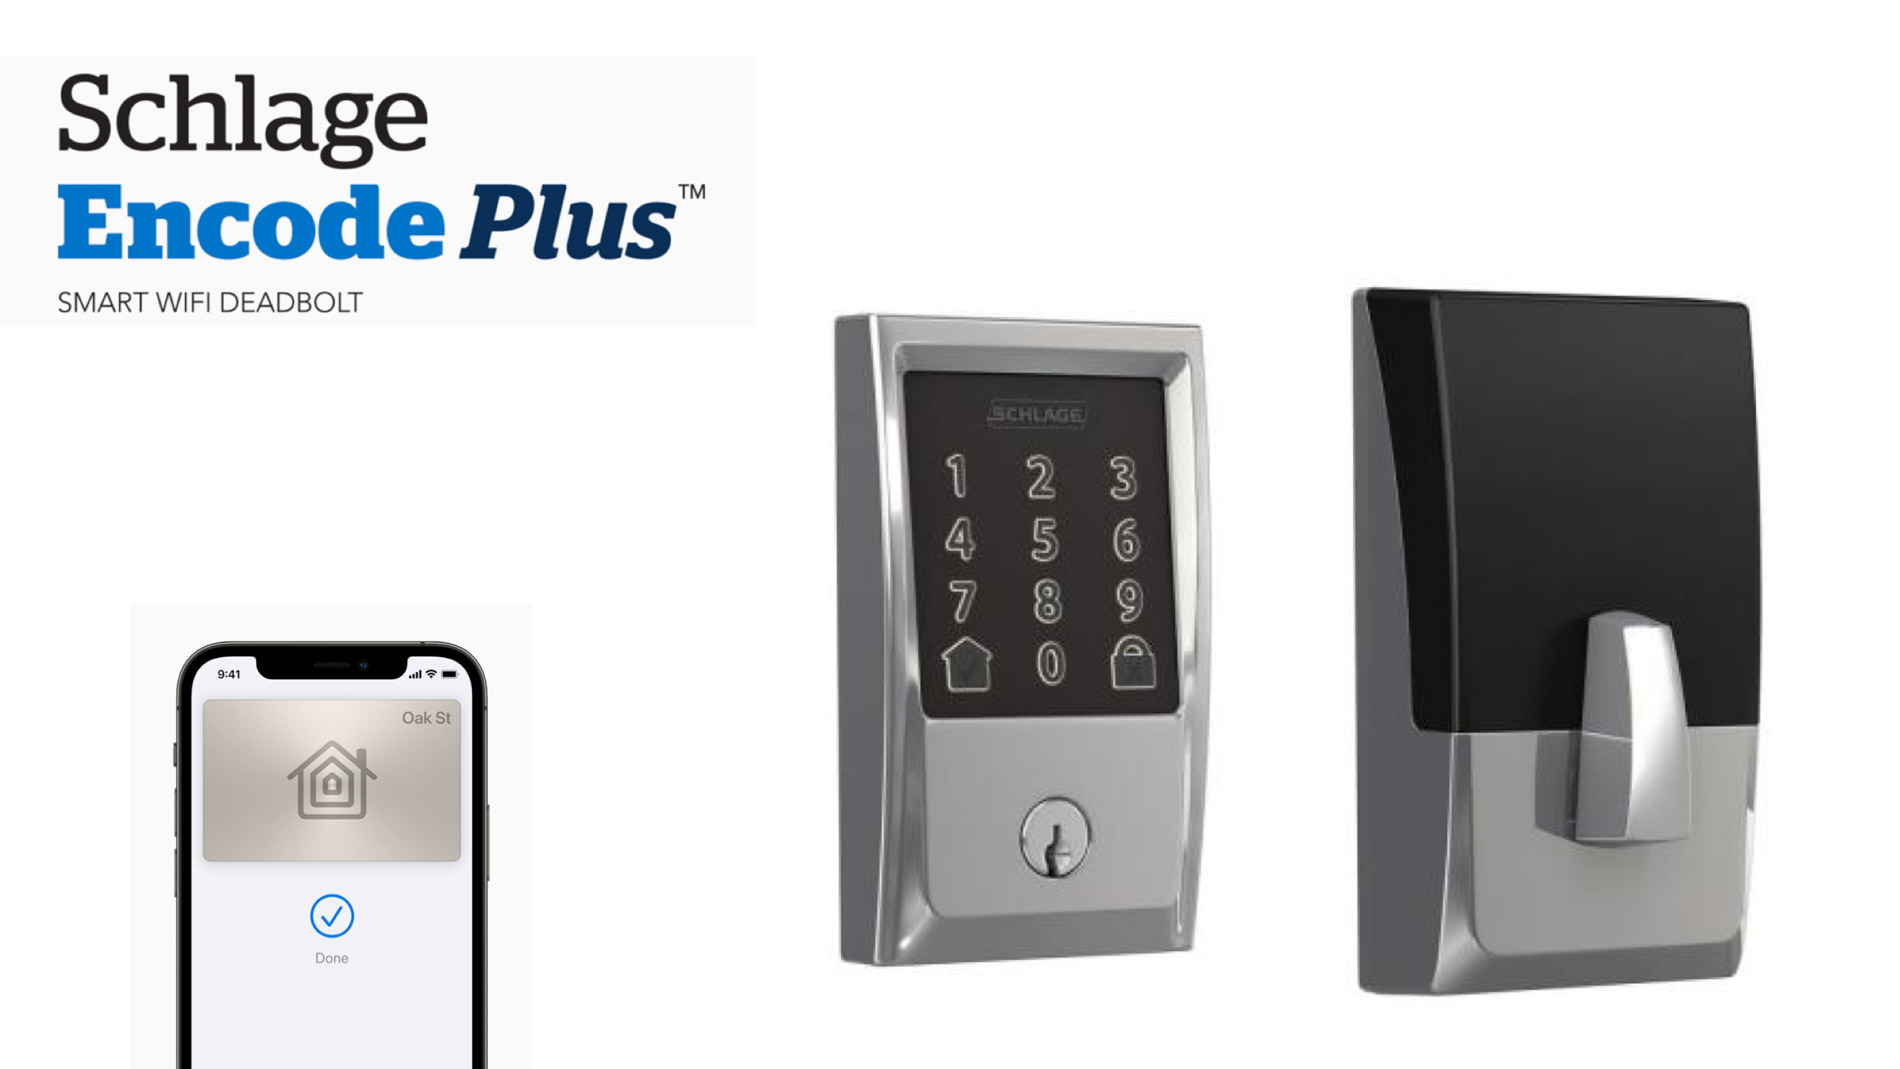 Schlage Encode Plus could support Apple Home Key